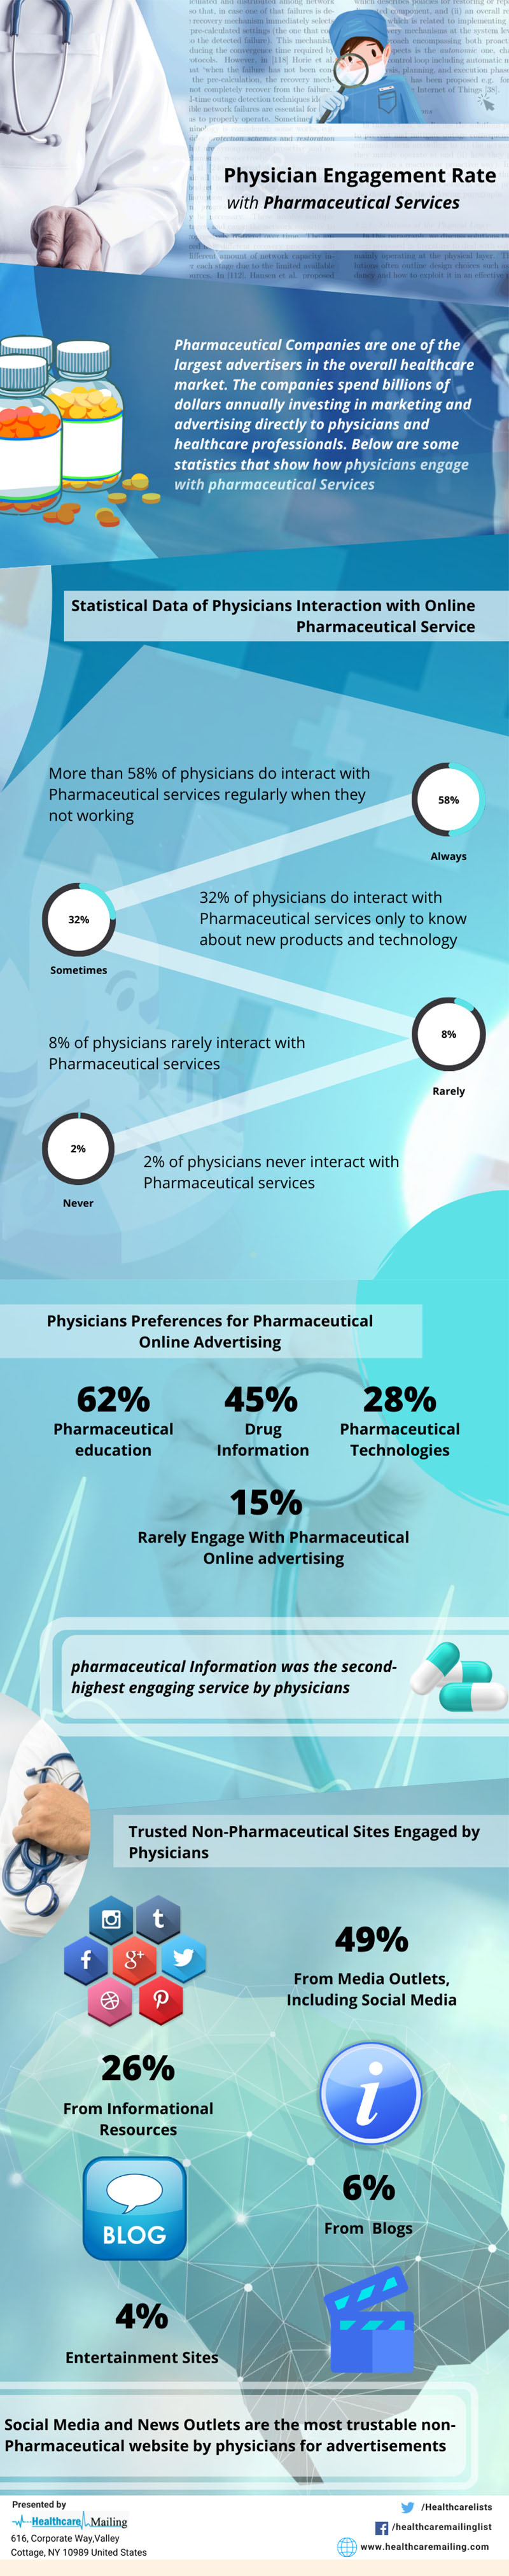 physician-engagement-rate-pharma-content